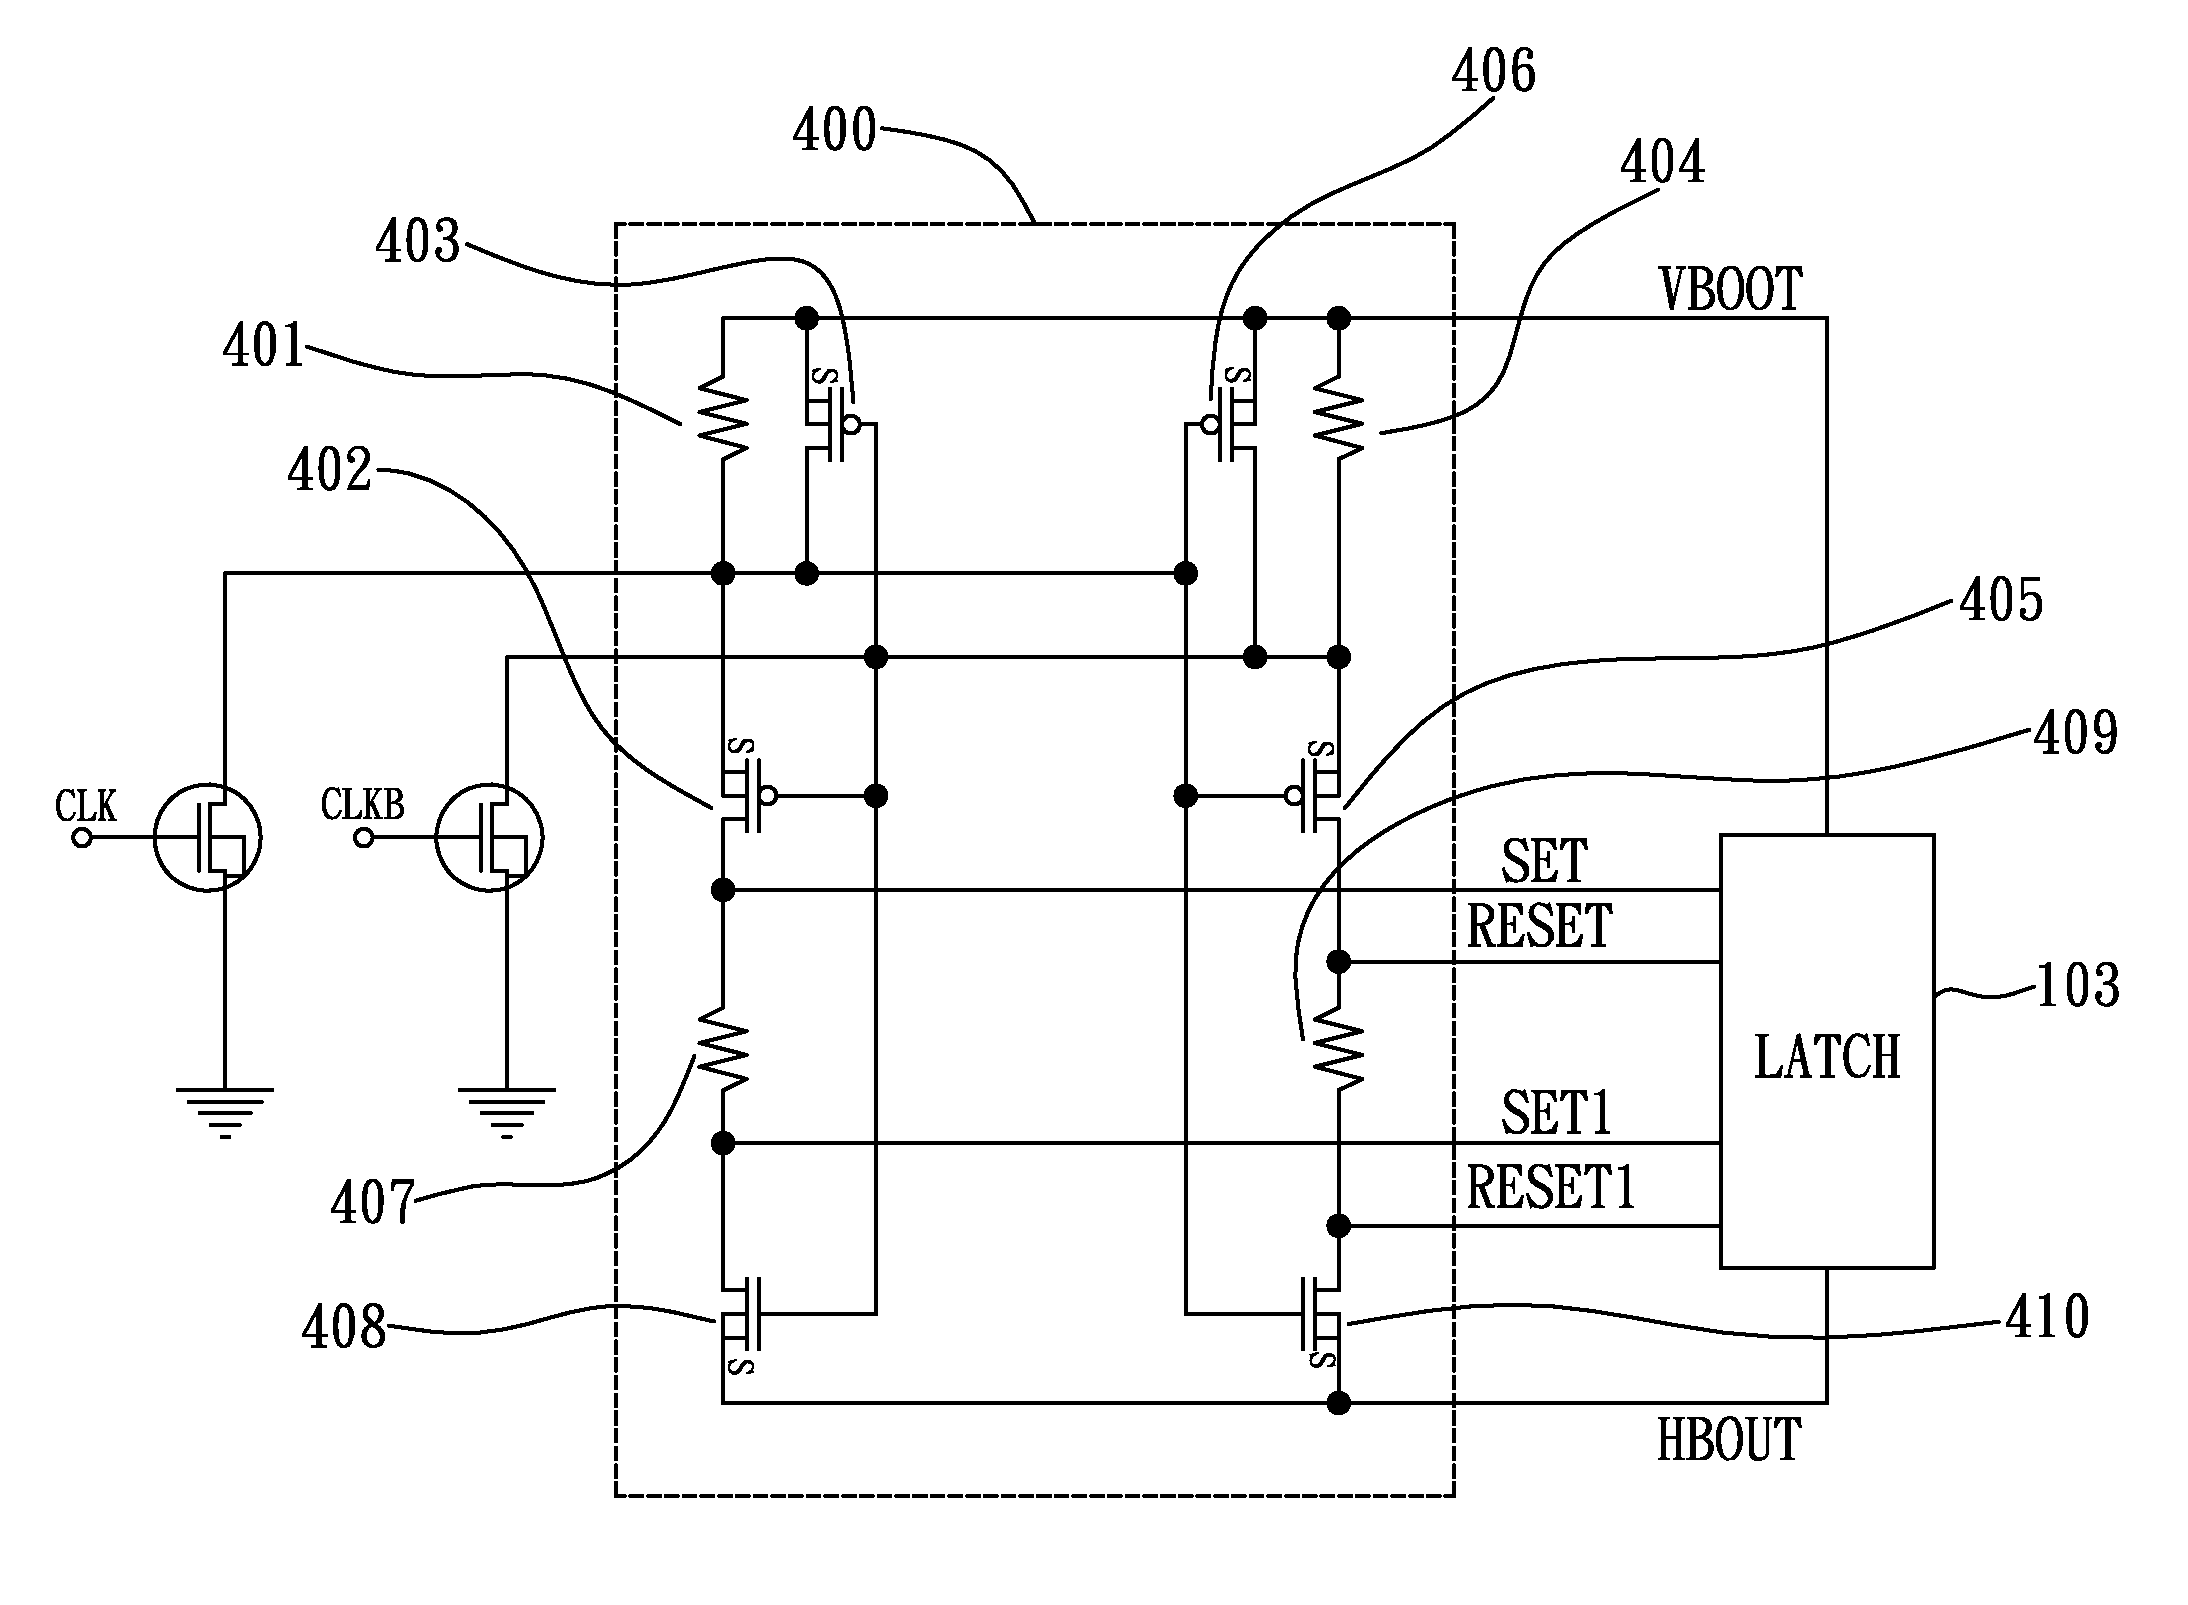 Active-load dominant circuit for common-mode glitch interference cancellation